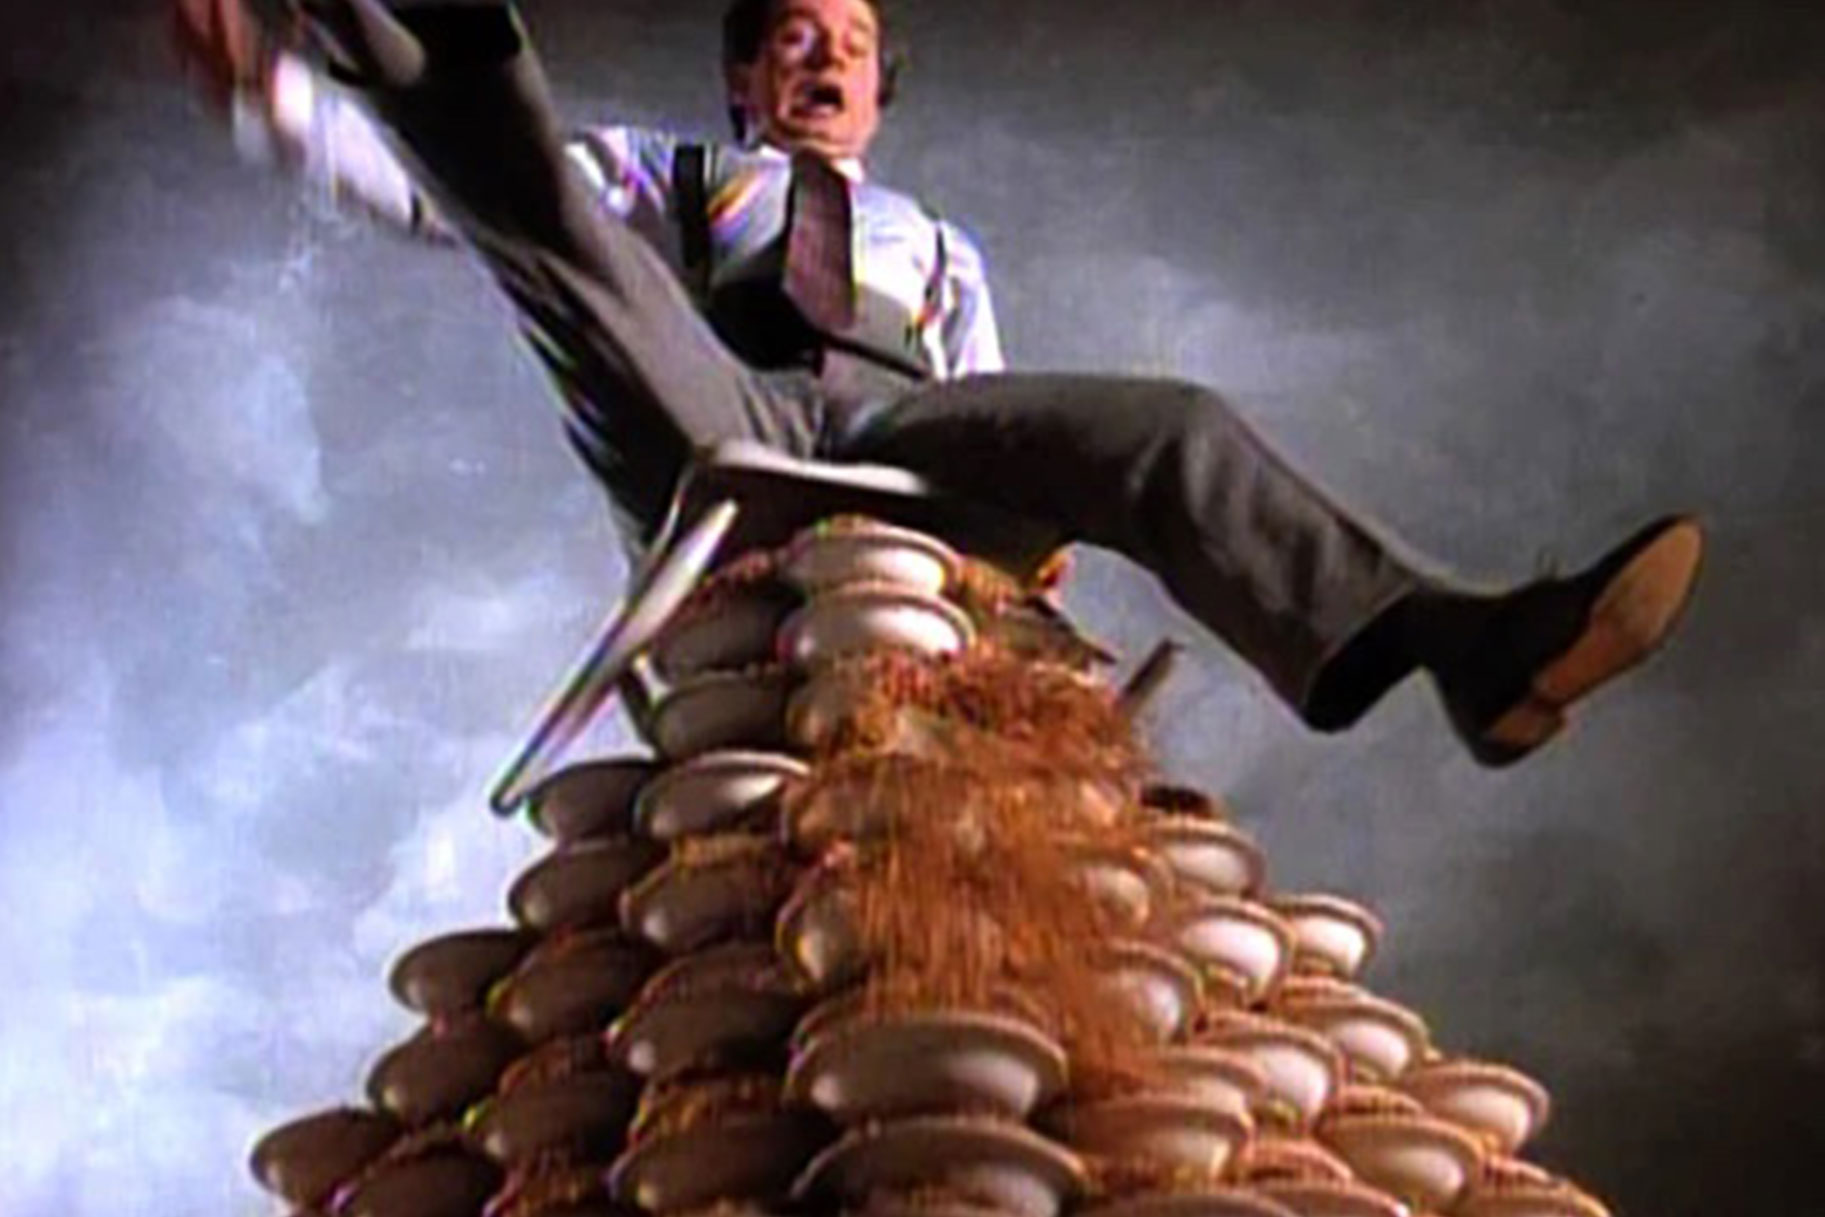 Phil Hatman sitting on a mountain of cereal bowls about to topple over